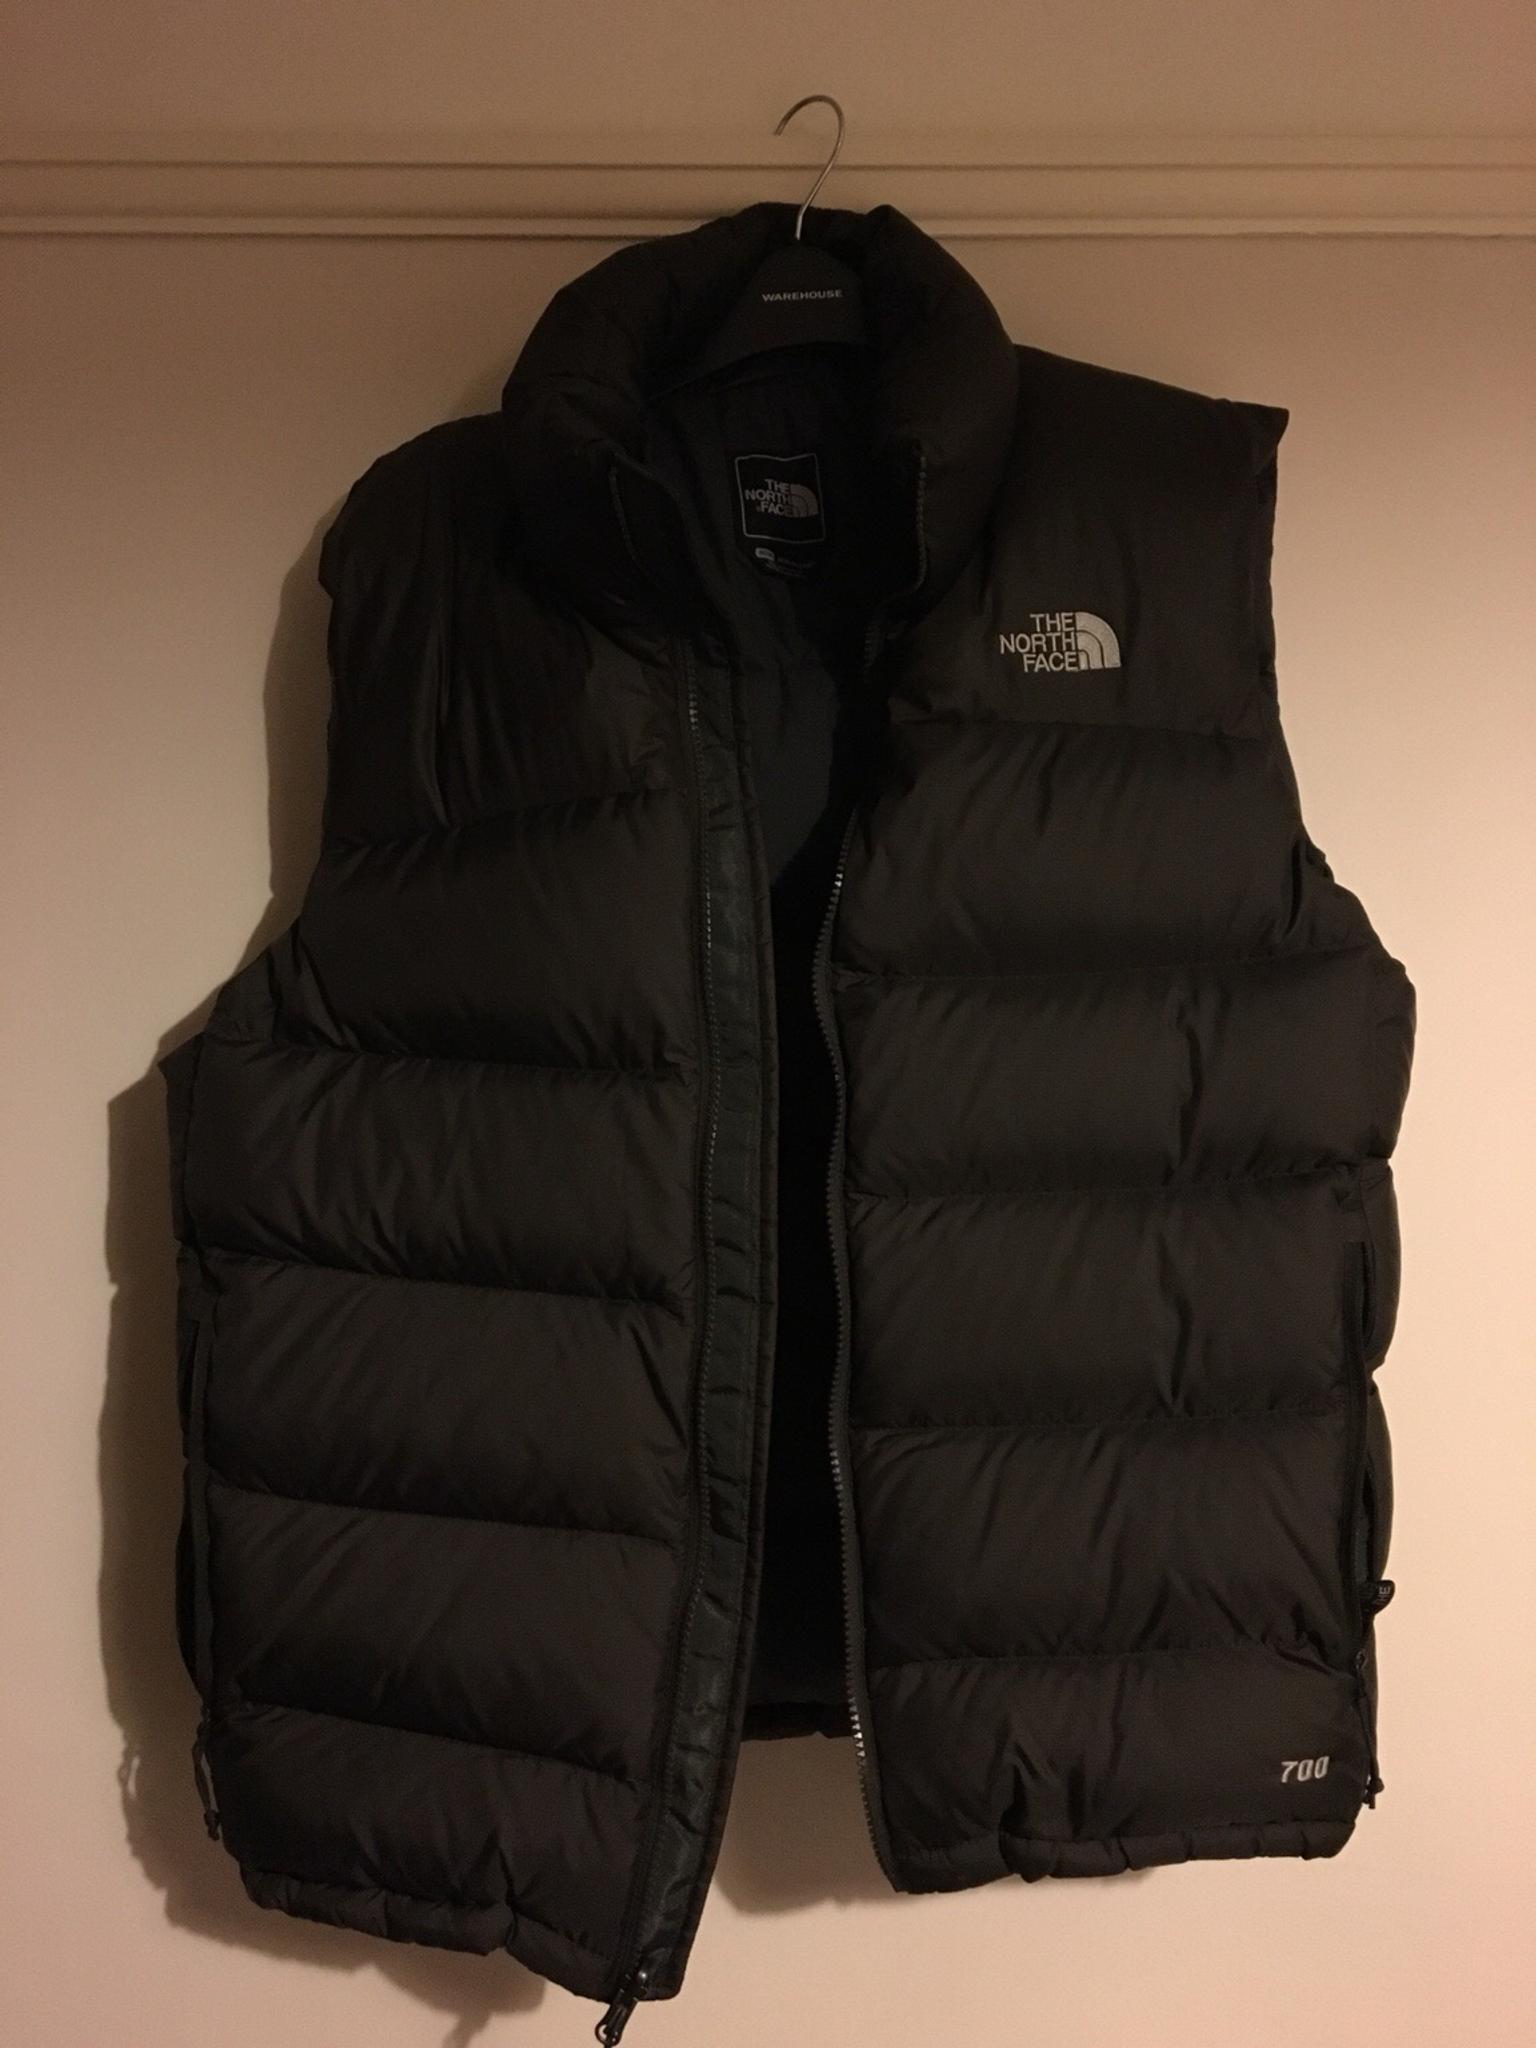 Mens North Face Gilet 700 Brown In London Borough Of Croydon For 25 00 For Sale Shpock